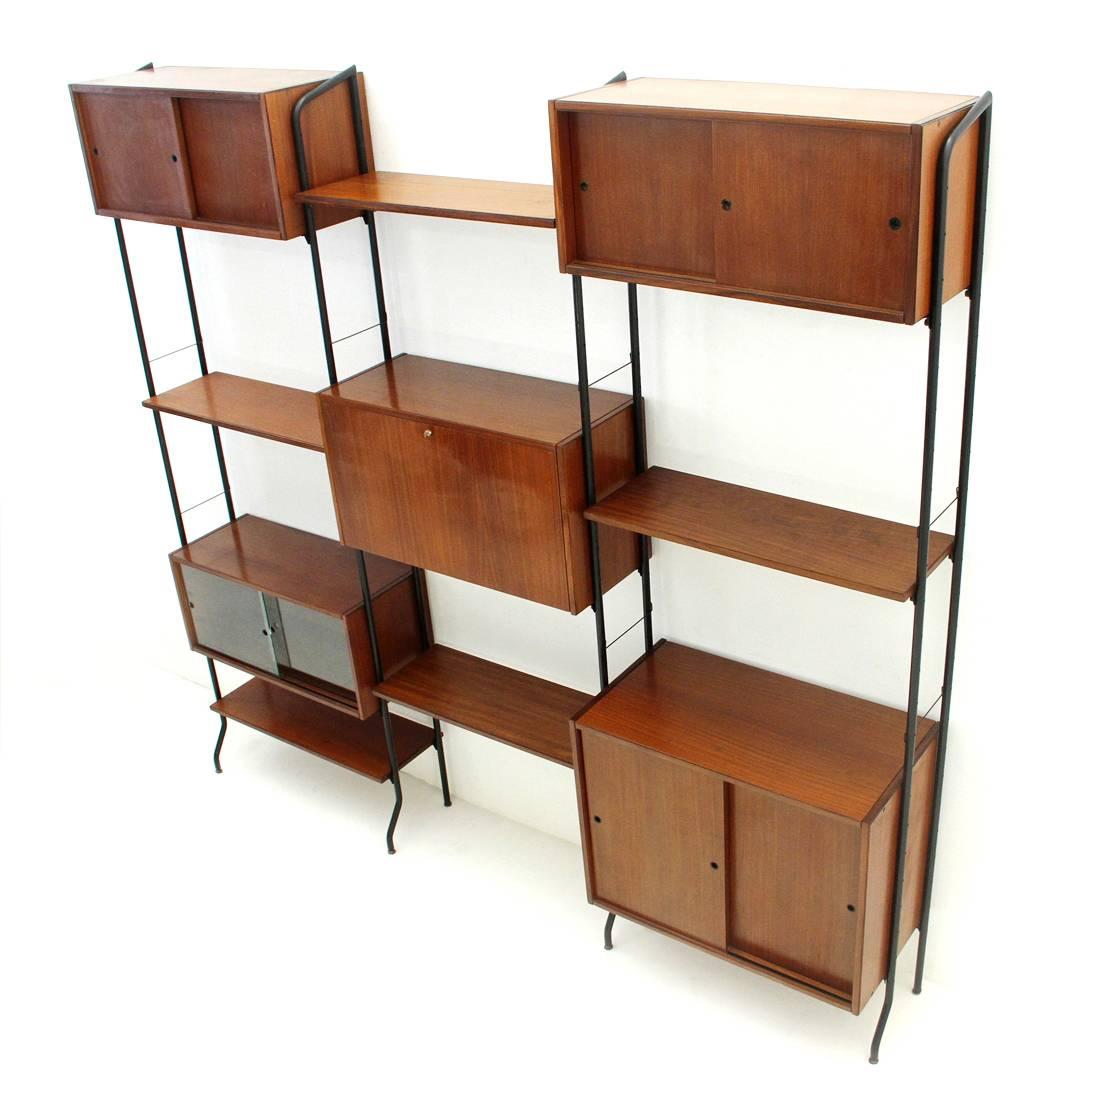 Mid-20th Century Aedes Italian Midcentury Wall Unit by Amma, 1950s